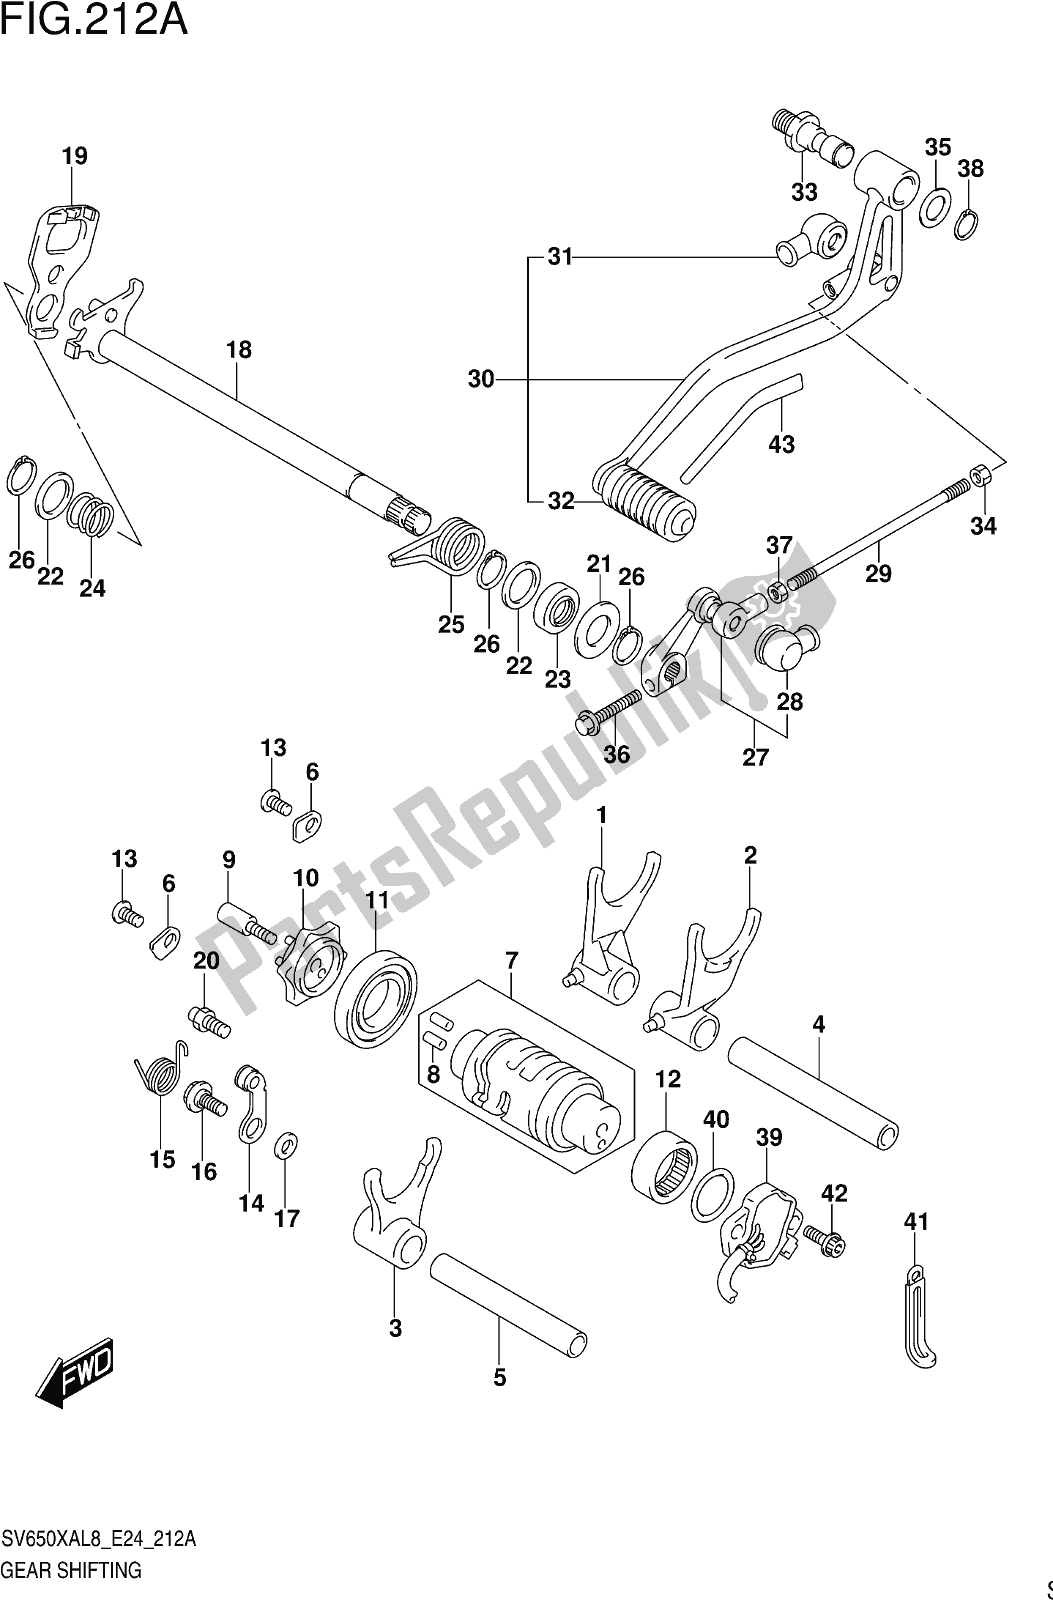 All parts for the Fig. 212a Gear Shifting of the Suzuki SV 650 XAU 2018